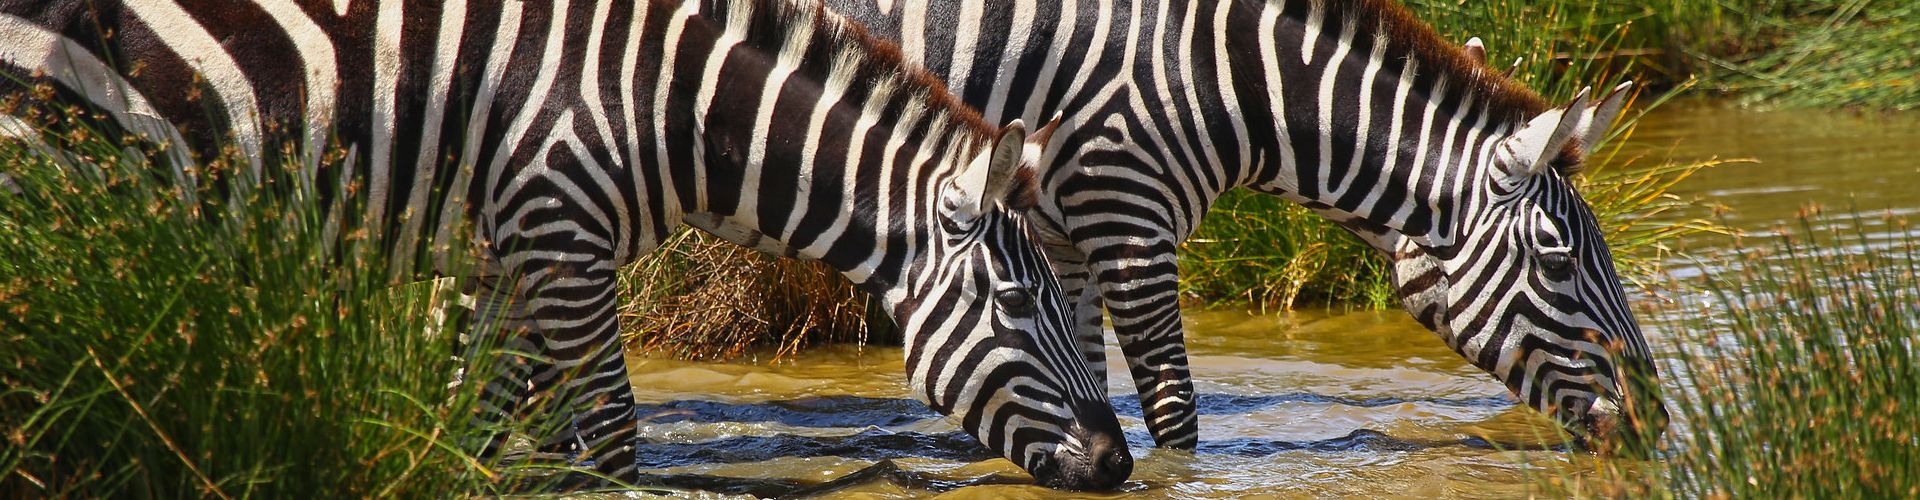 2 Zebras drinking water from a small pond in Selous Game Reserve